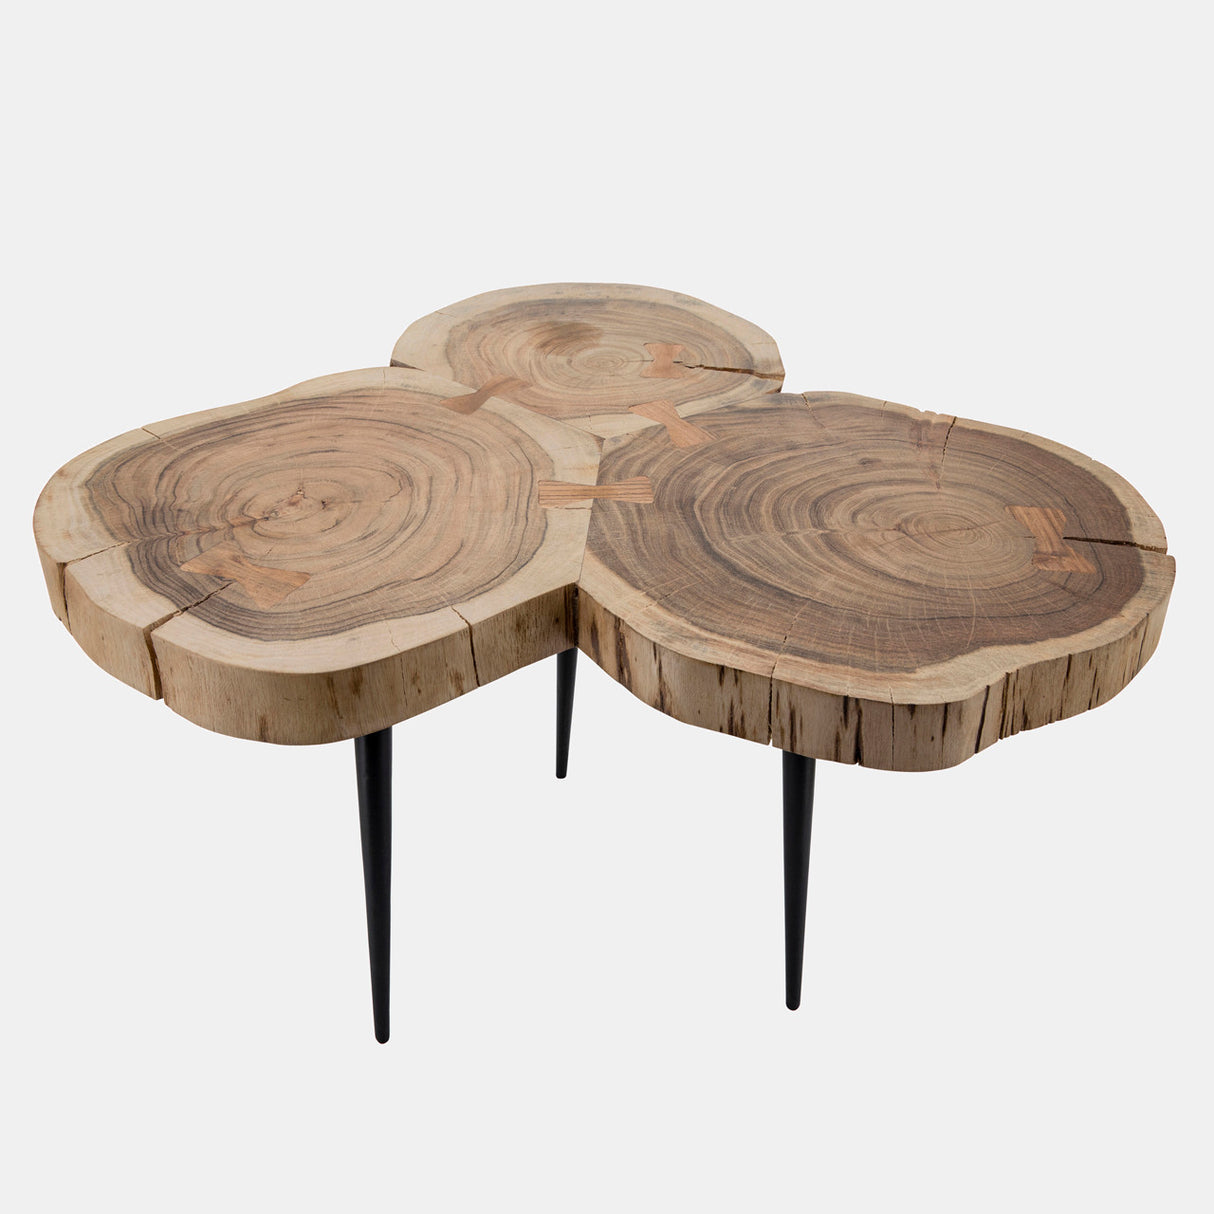 3-legged Wooden Side Table - Pickup Only